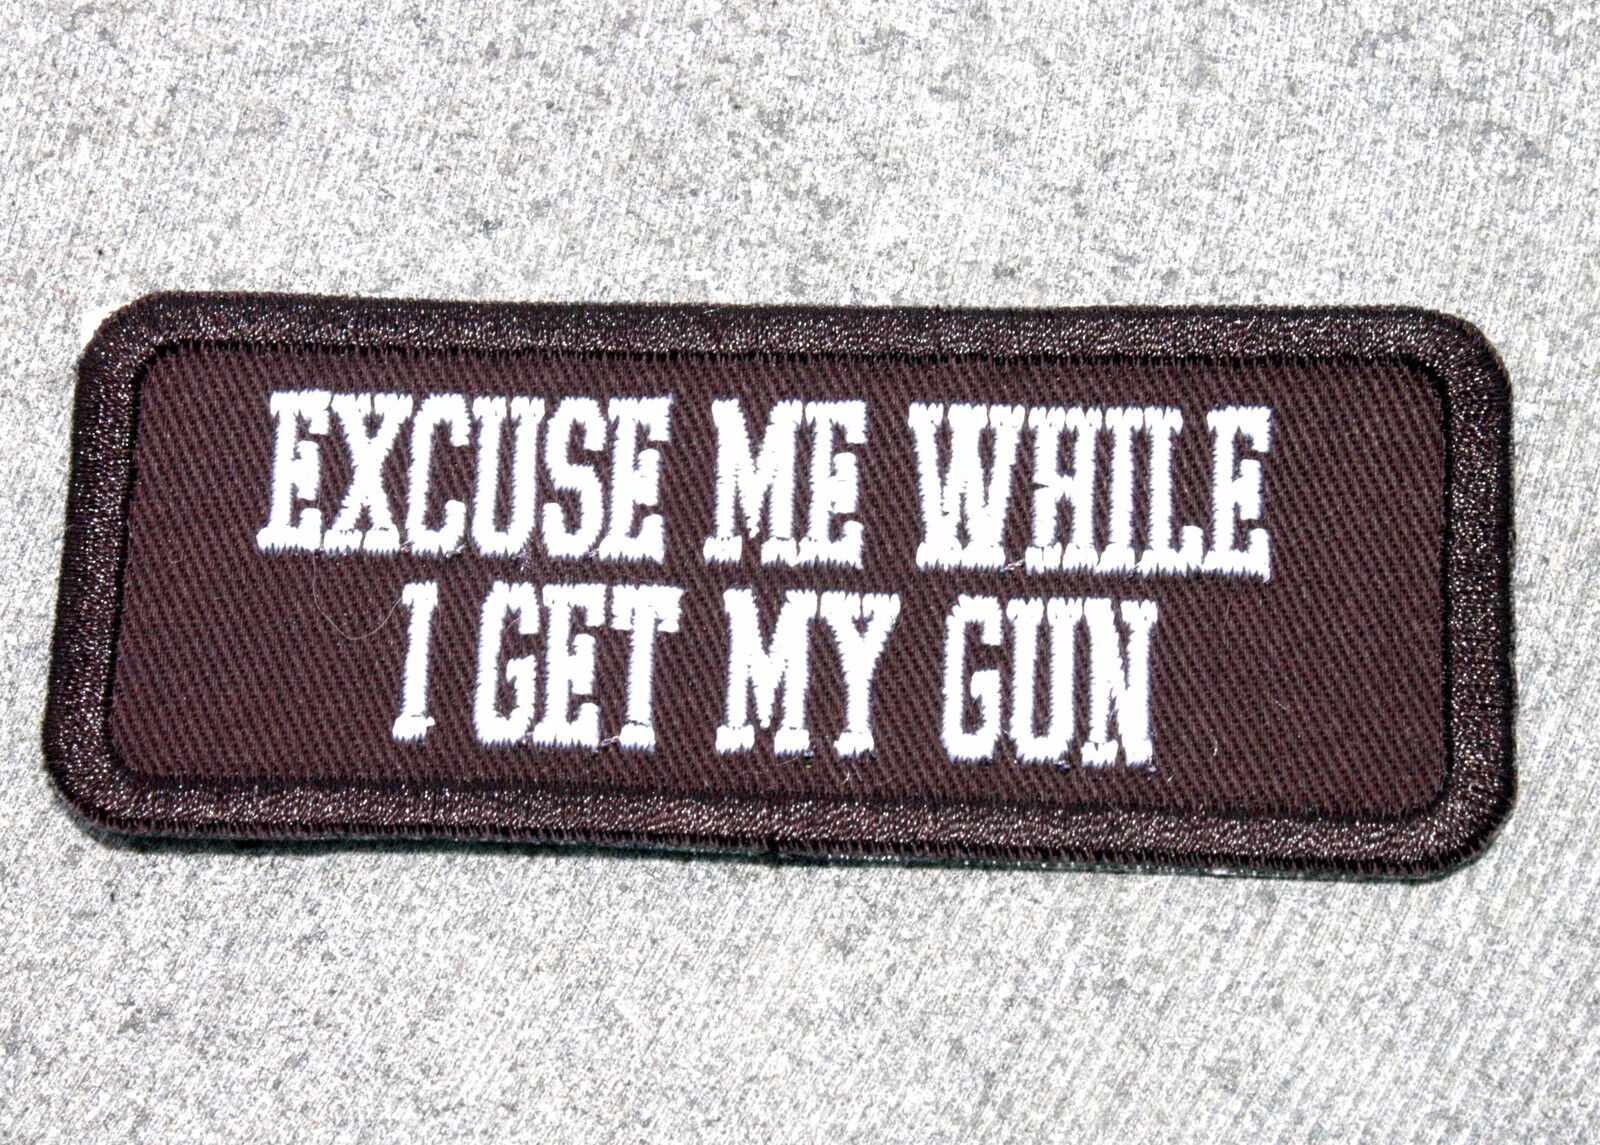 EXCUSE ME WHILE I GET MY GUN Biker Vest Jacket Patch embroidered, motorcycle